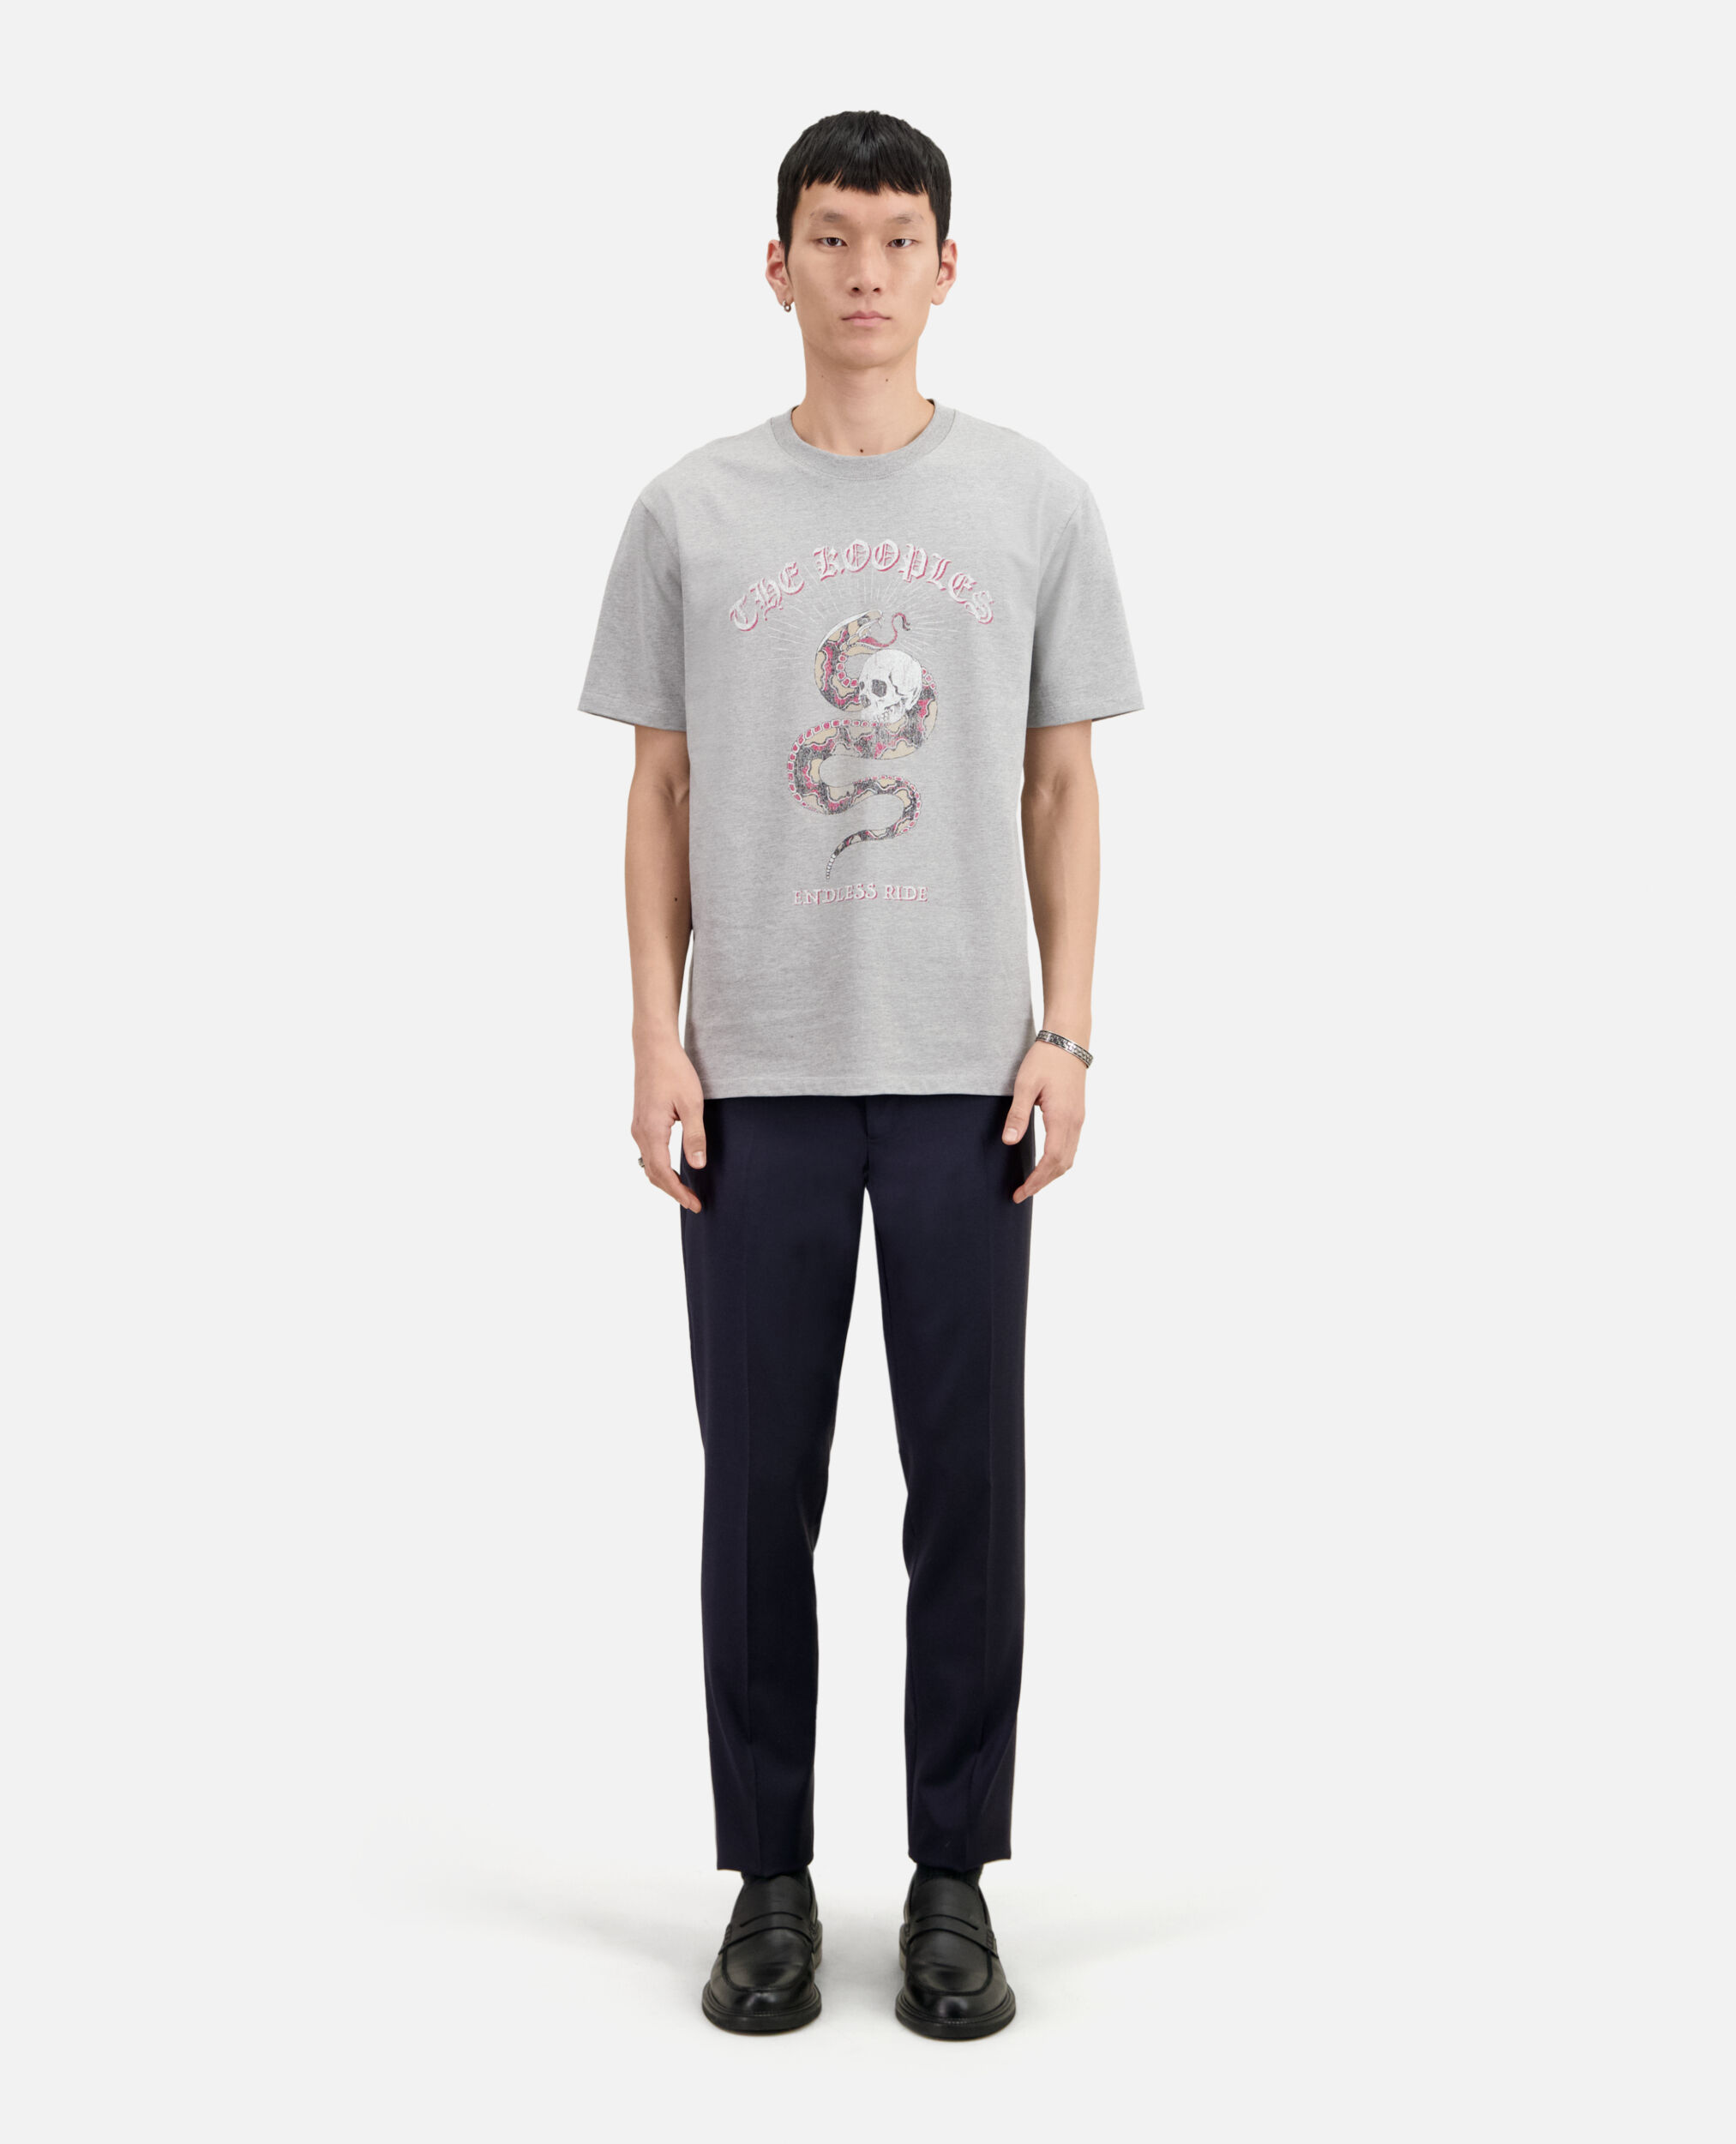 Camiseta hombre gris claro Sneaky snake, LIGHT GREY CHINE, hi-res image number null